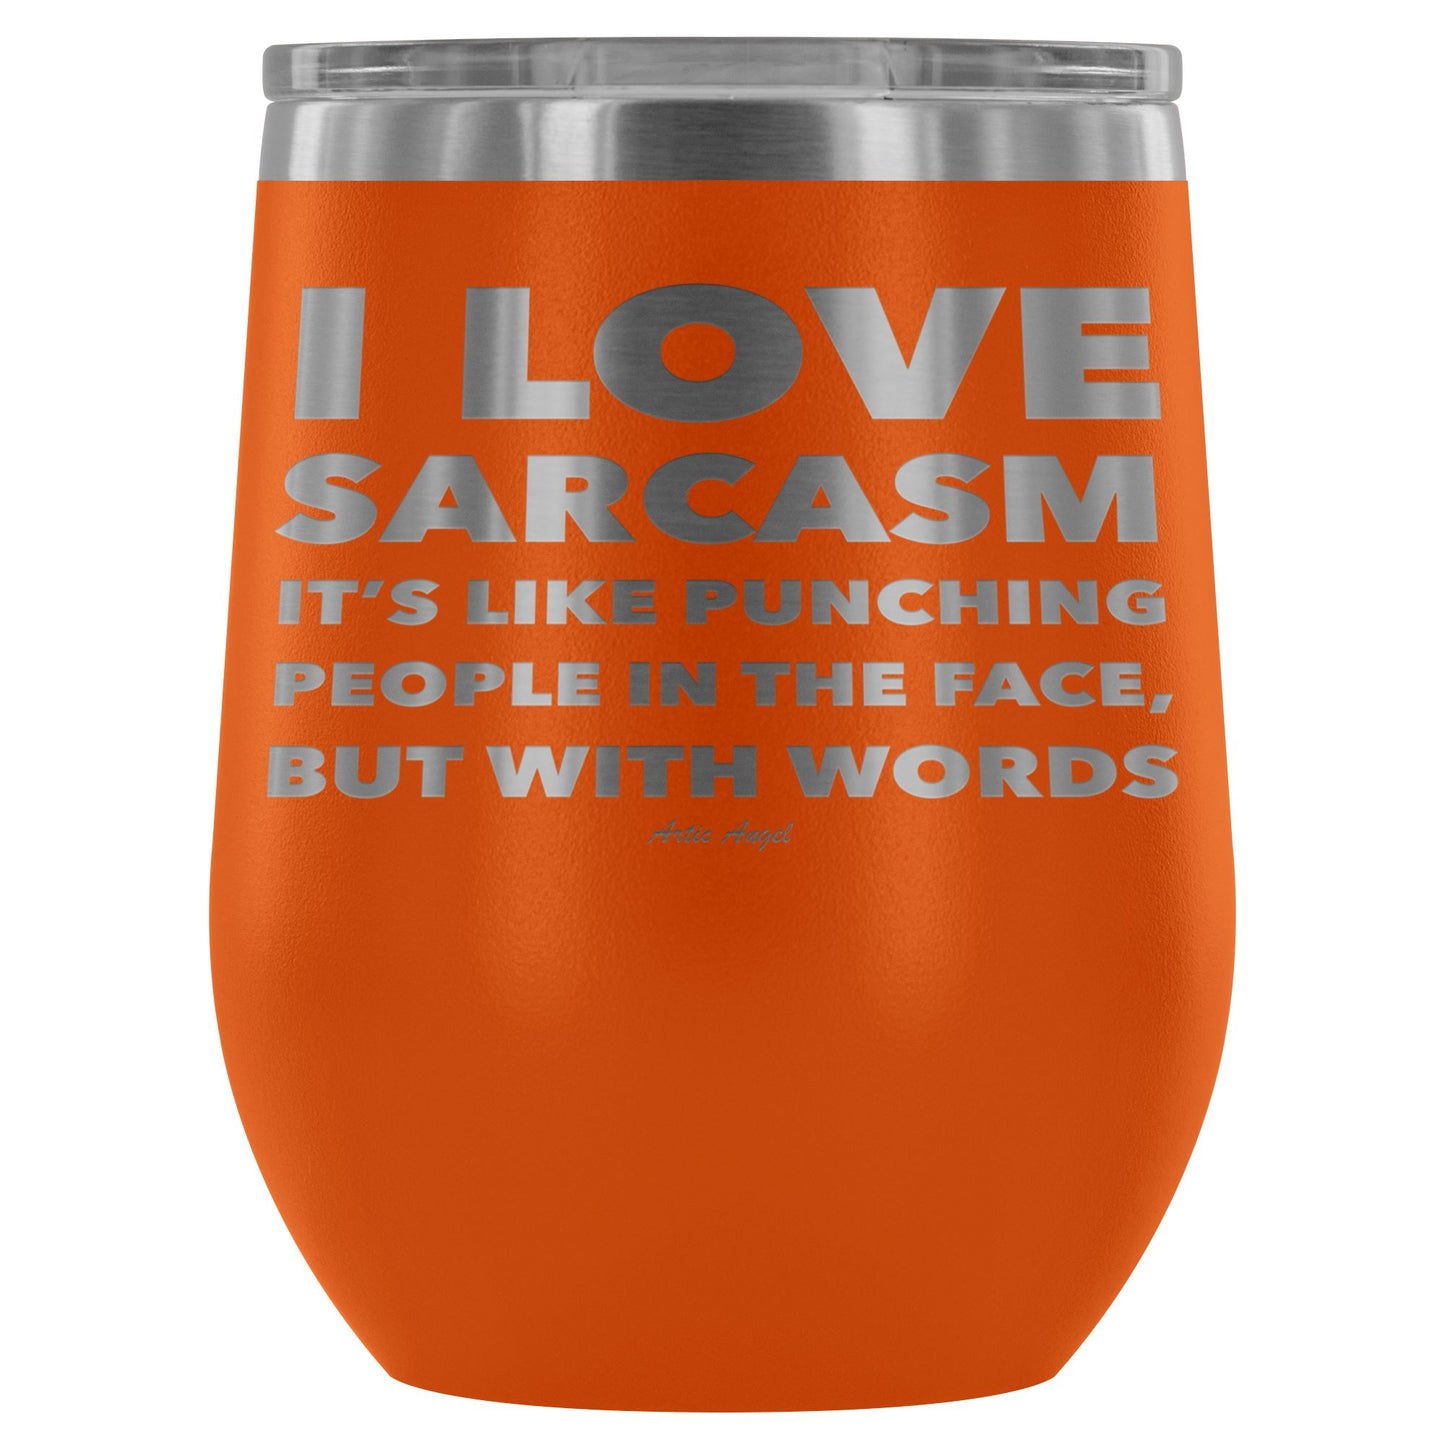 "I Love Sarcasm It's Like Punching People In The Face, But With Words" - Stemless Wine Cup Wine Tumbler Orange 